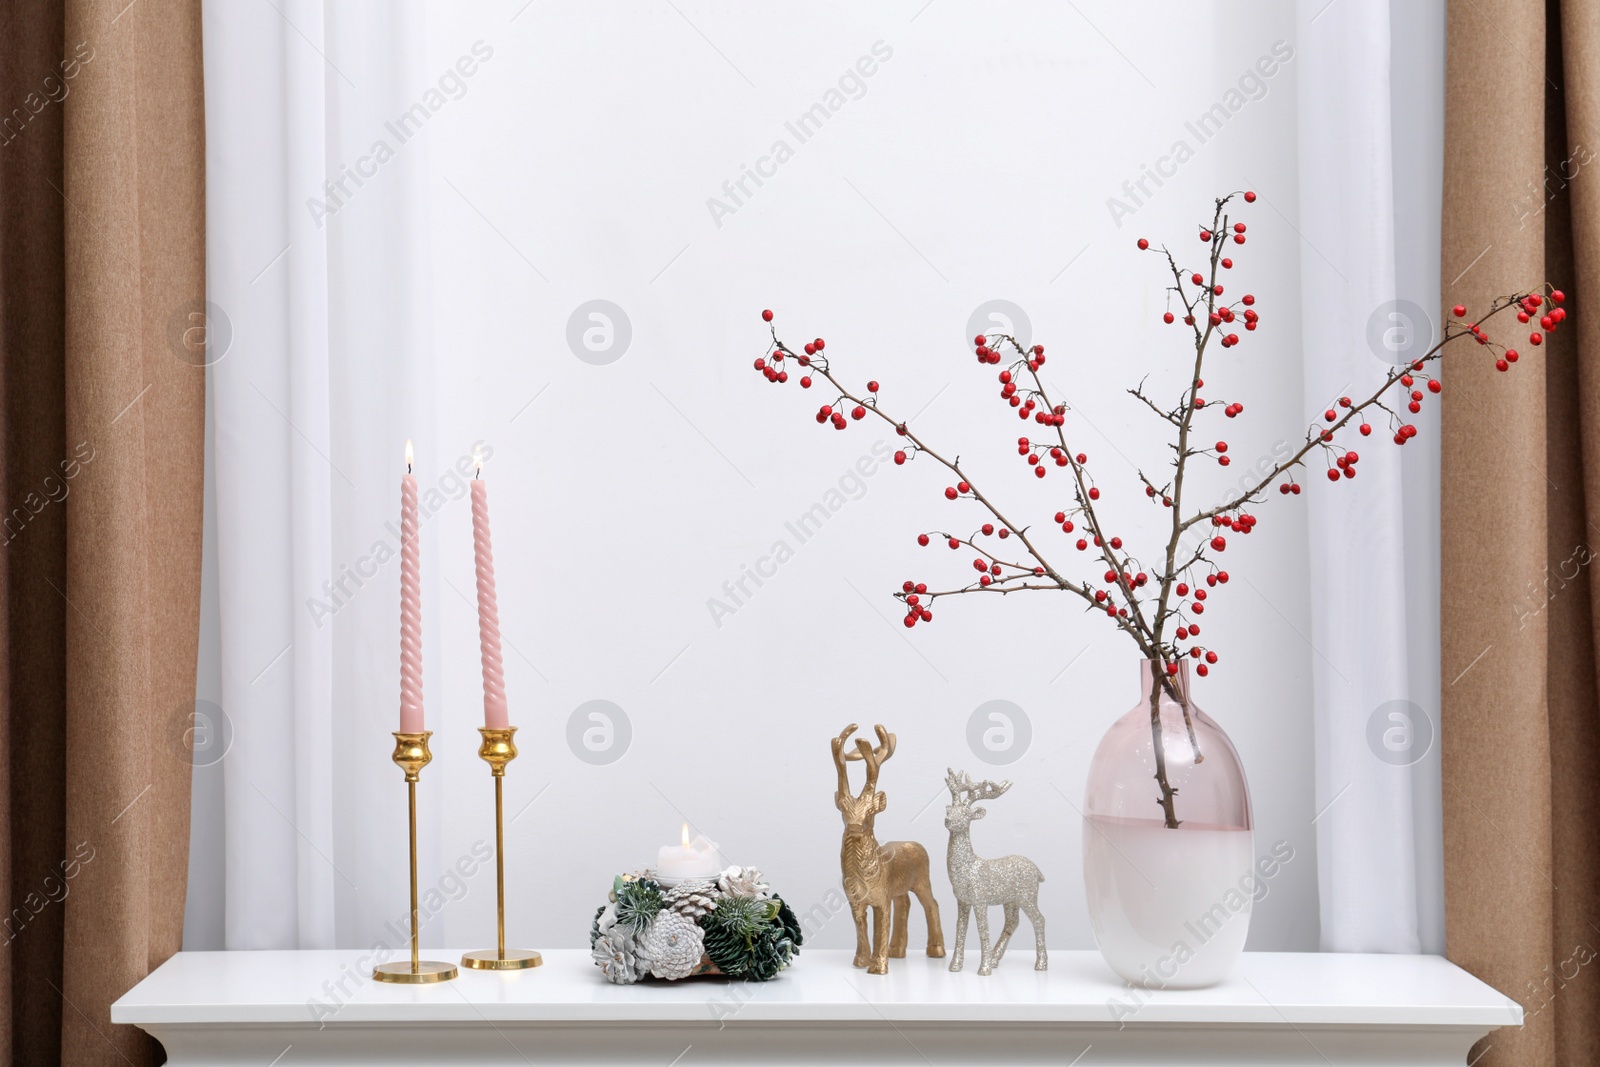 Photo of Hawthorn branches with red berries in vase, candles and deer figures on white table near window indoors